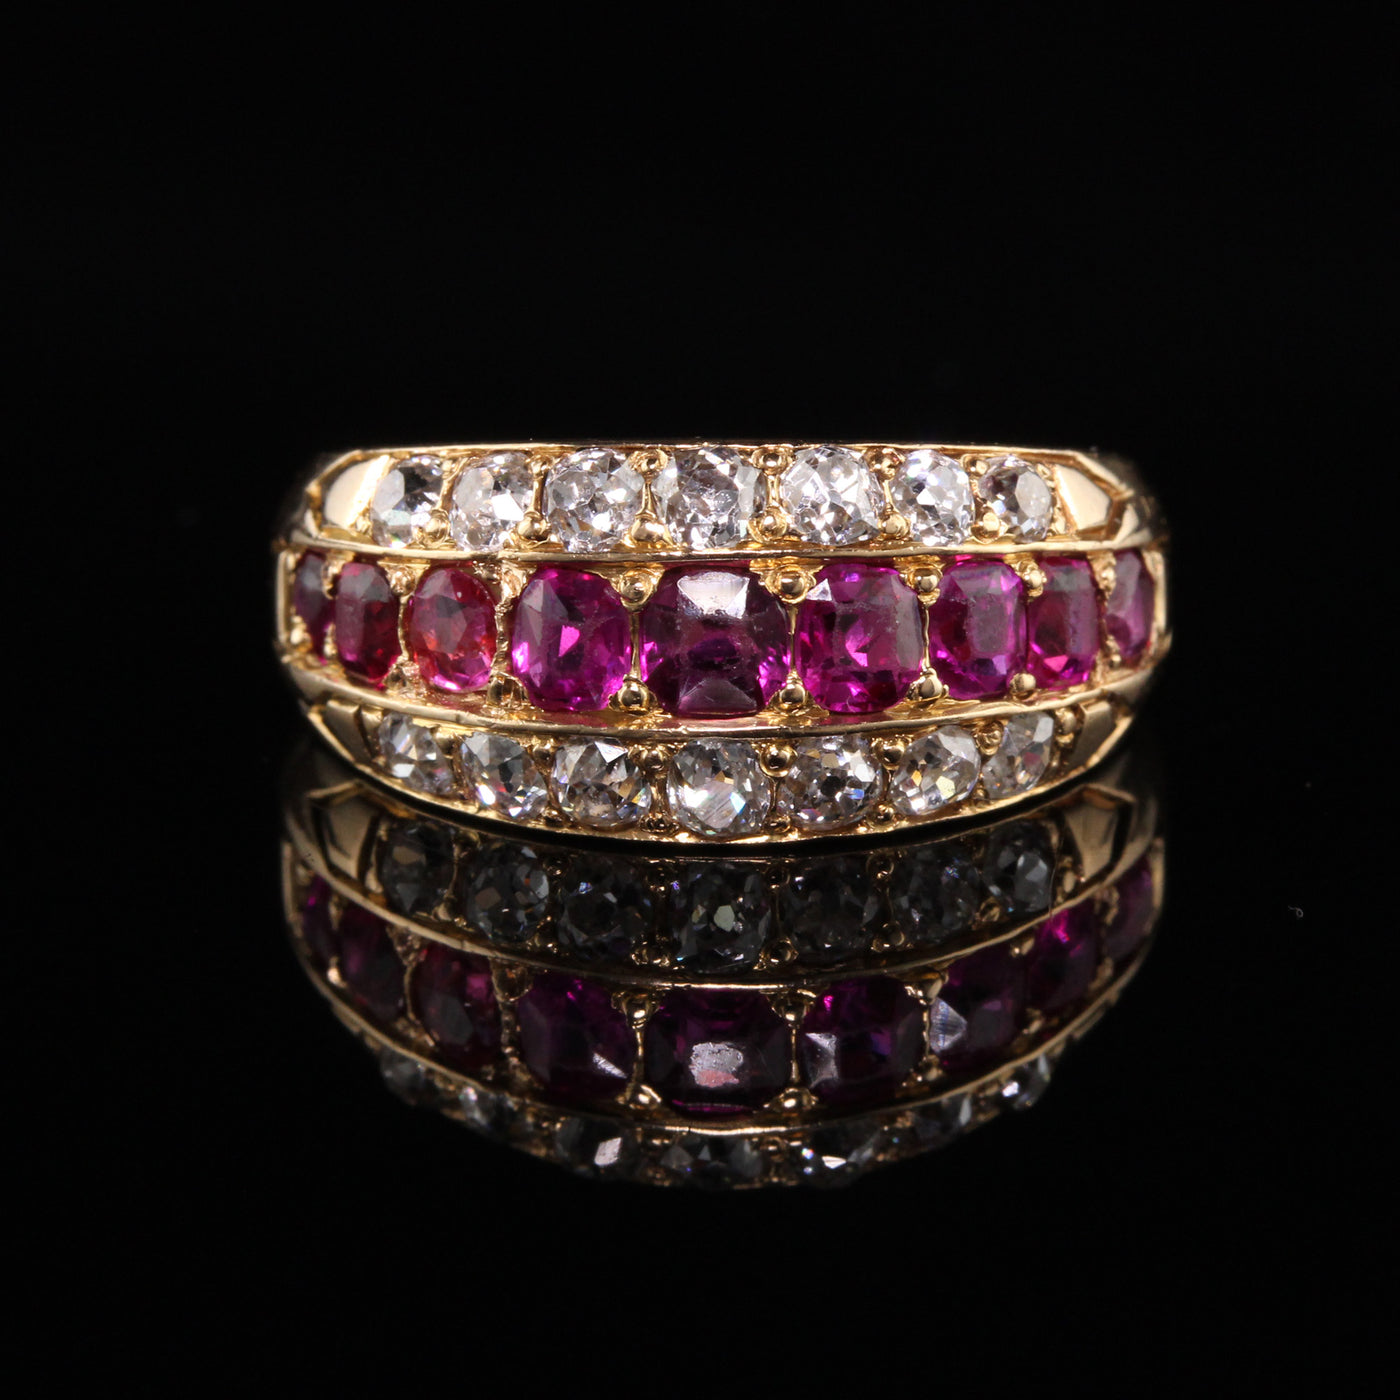 Antique Victorian Bailey Banks and Biddle 18K Rose Gold Diamond and Ruby Band